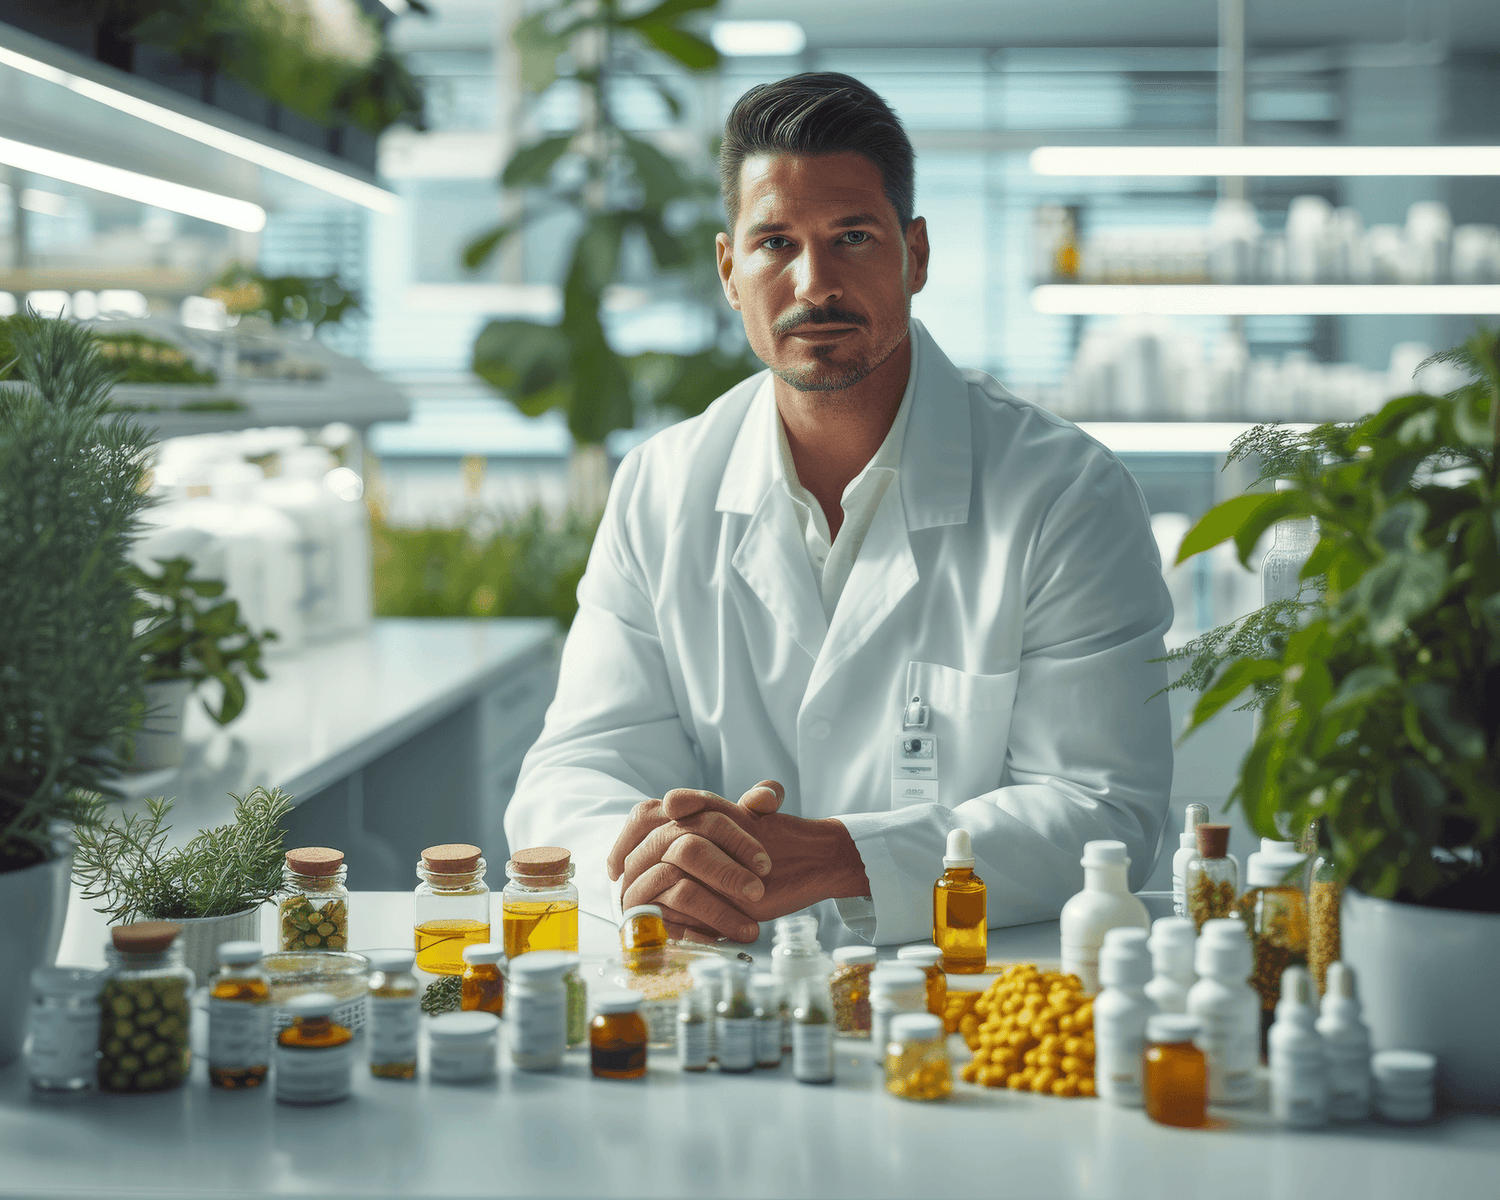 Image of a lab technician in front of bottles of pills